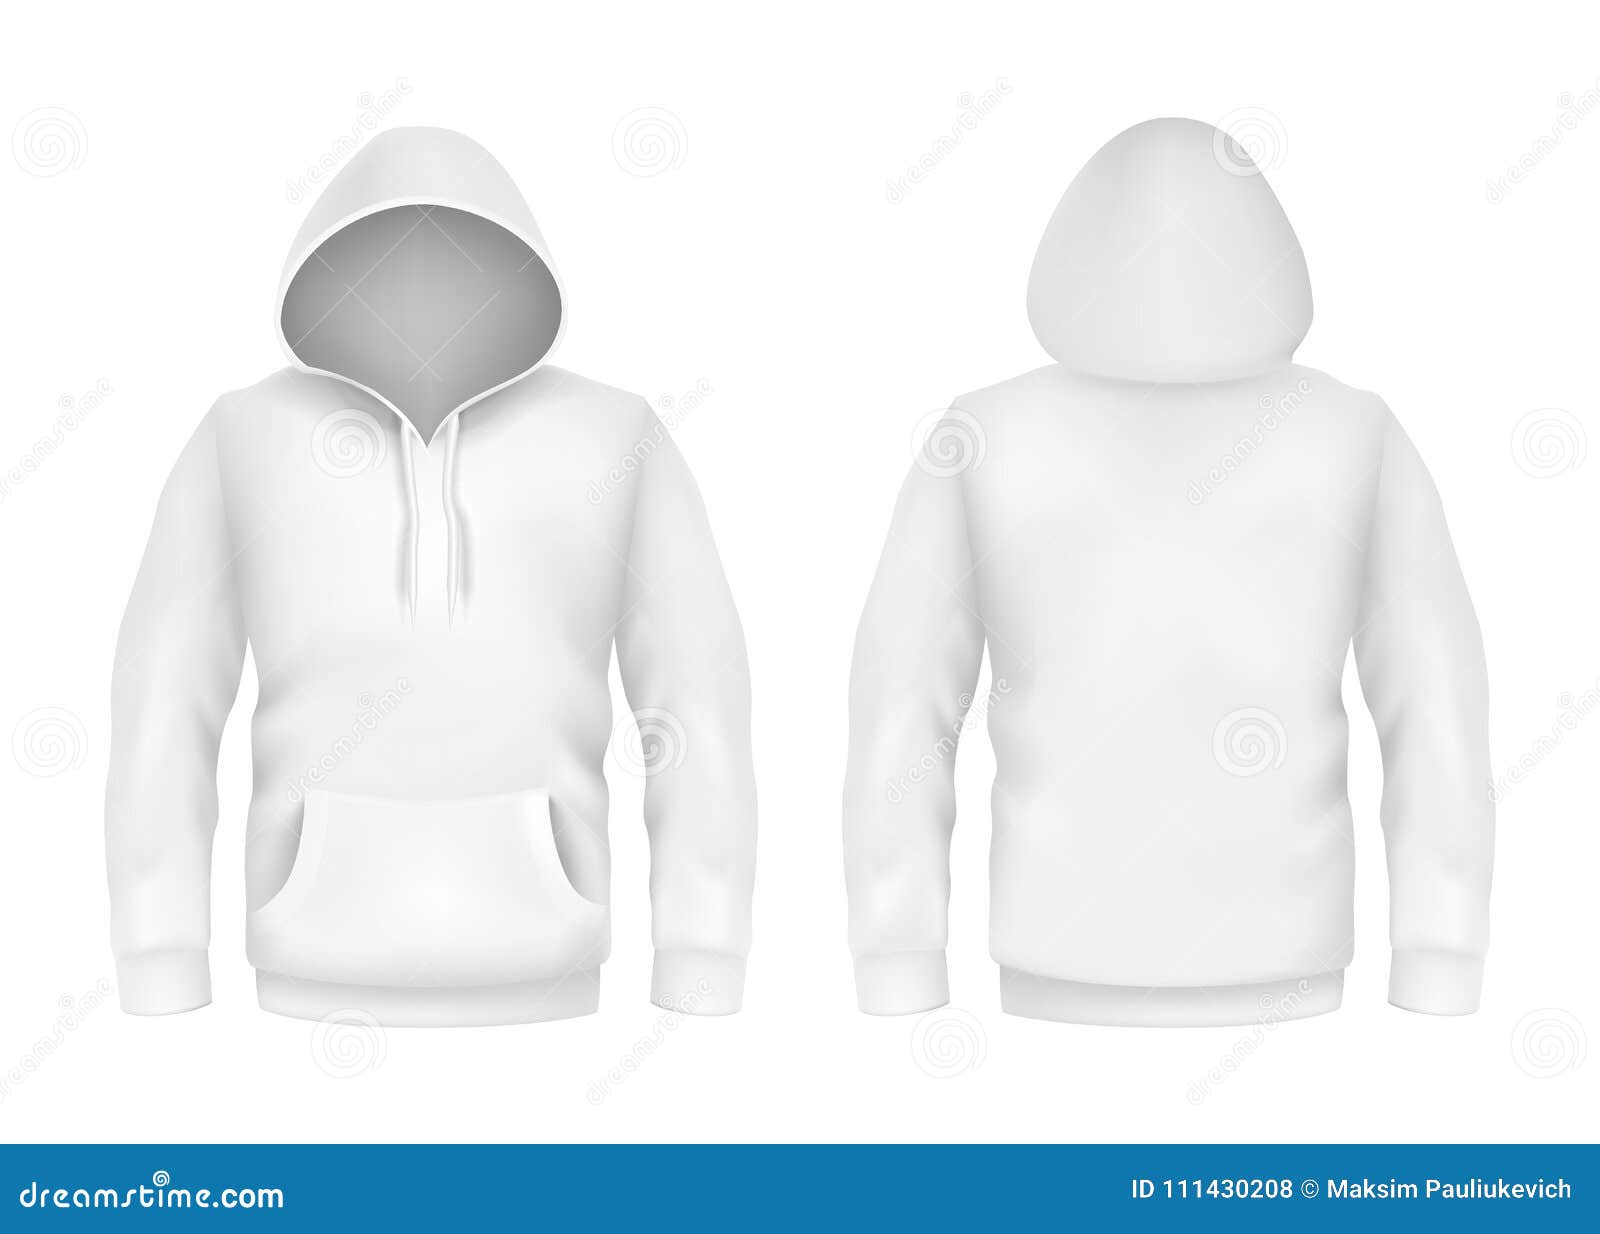 Download Sweatshirt Cartoons, Illustrations & Vector Stock Images - 6129 Pictures to download from ...